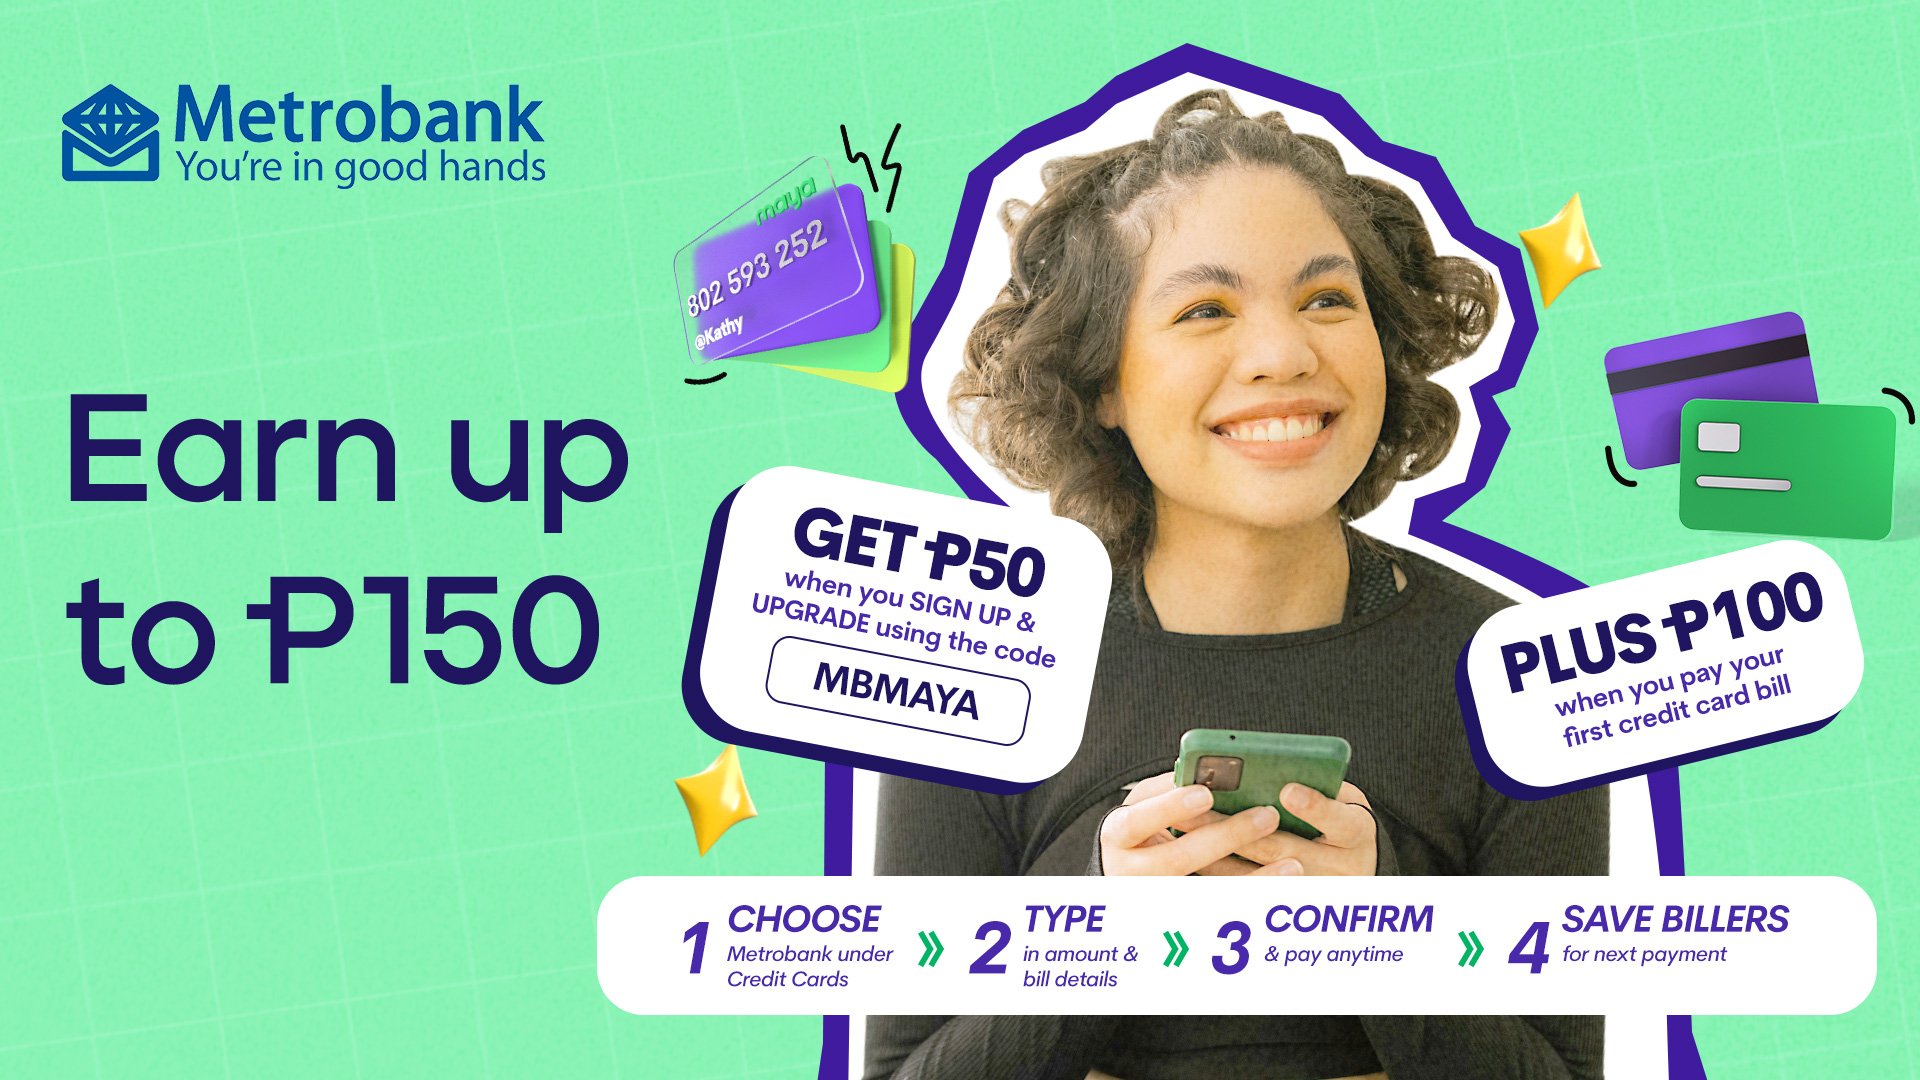 Up to P150 for 1st Metrobank card bill payment